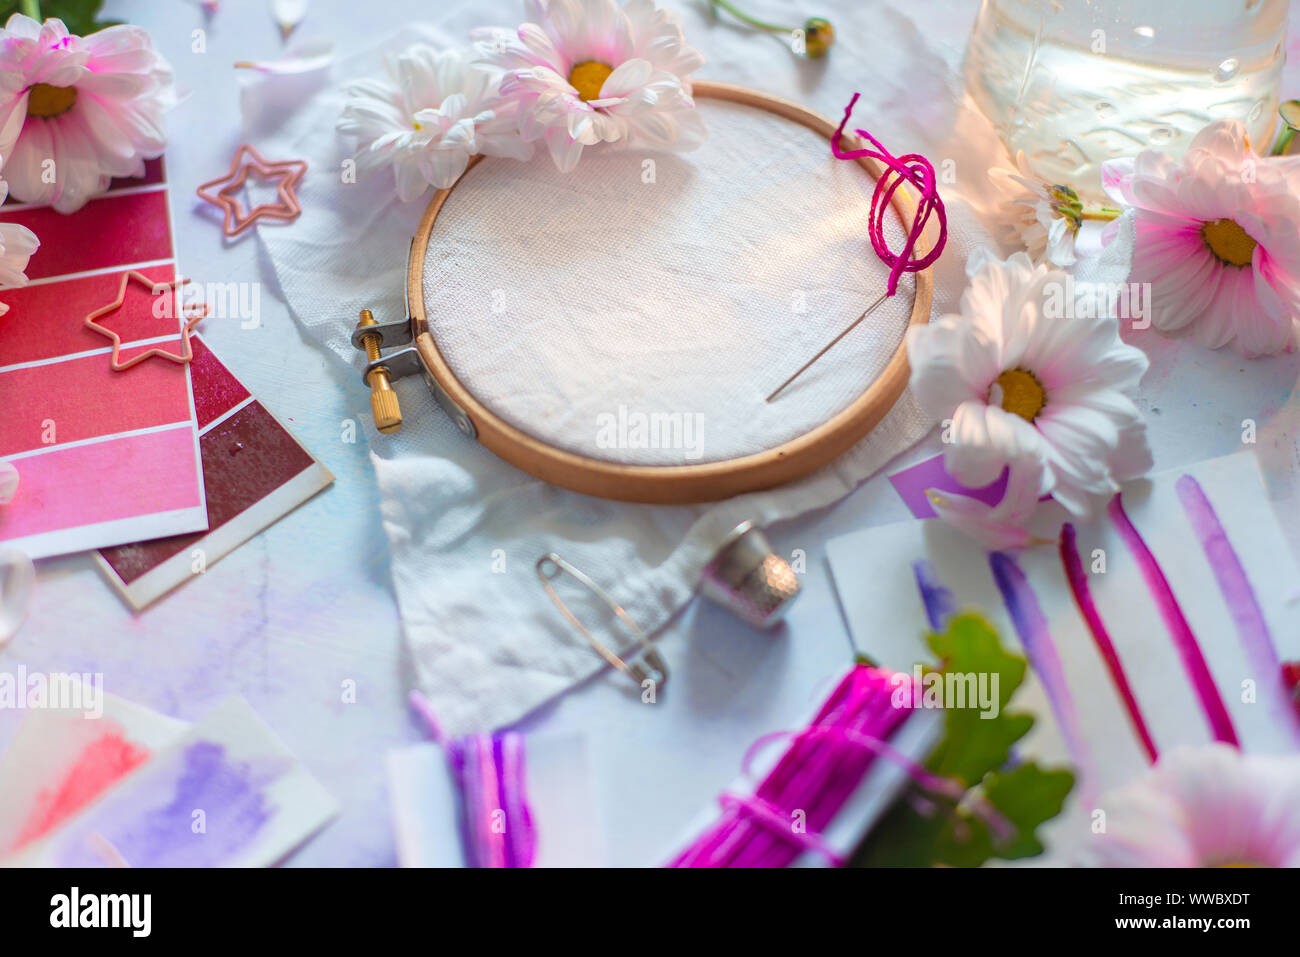 Embroidery frame header with flowers. Pink, white and purple pastel tones, copy space Stock Photo